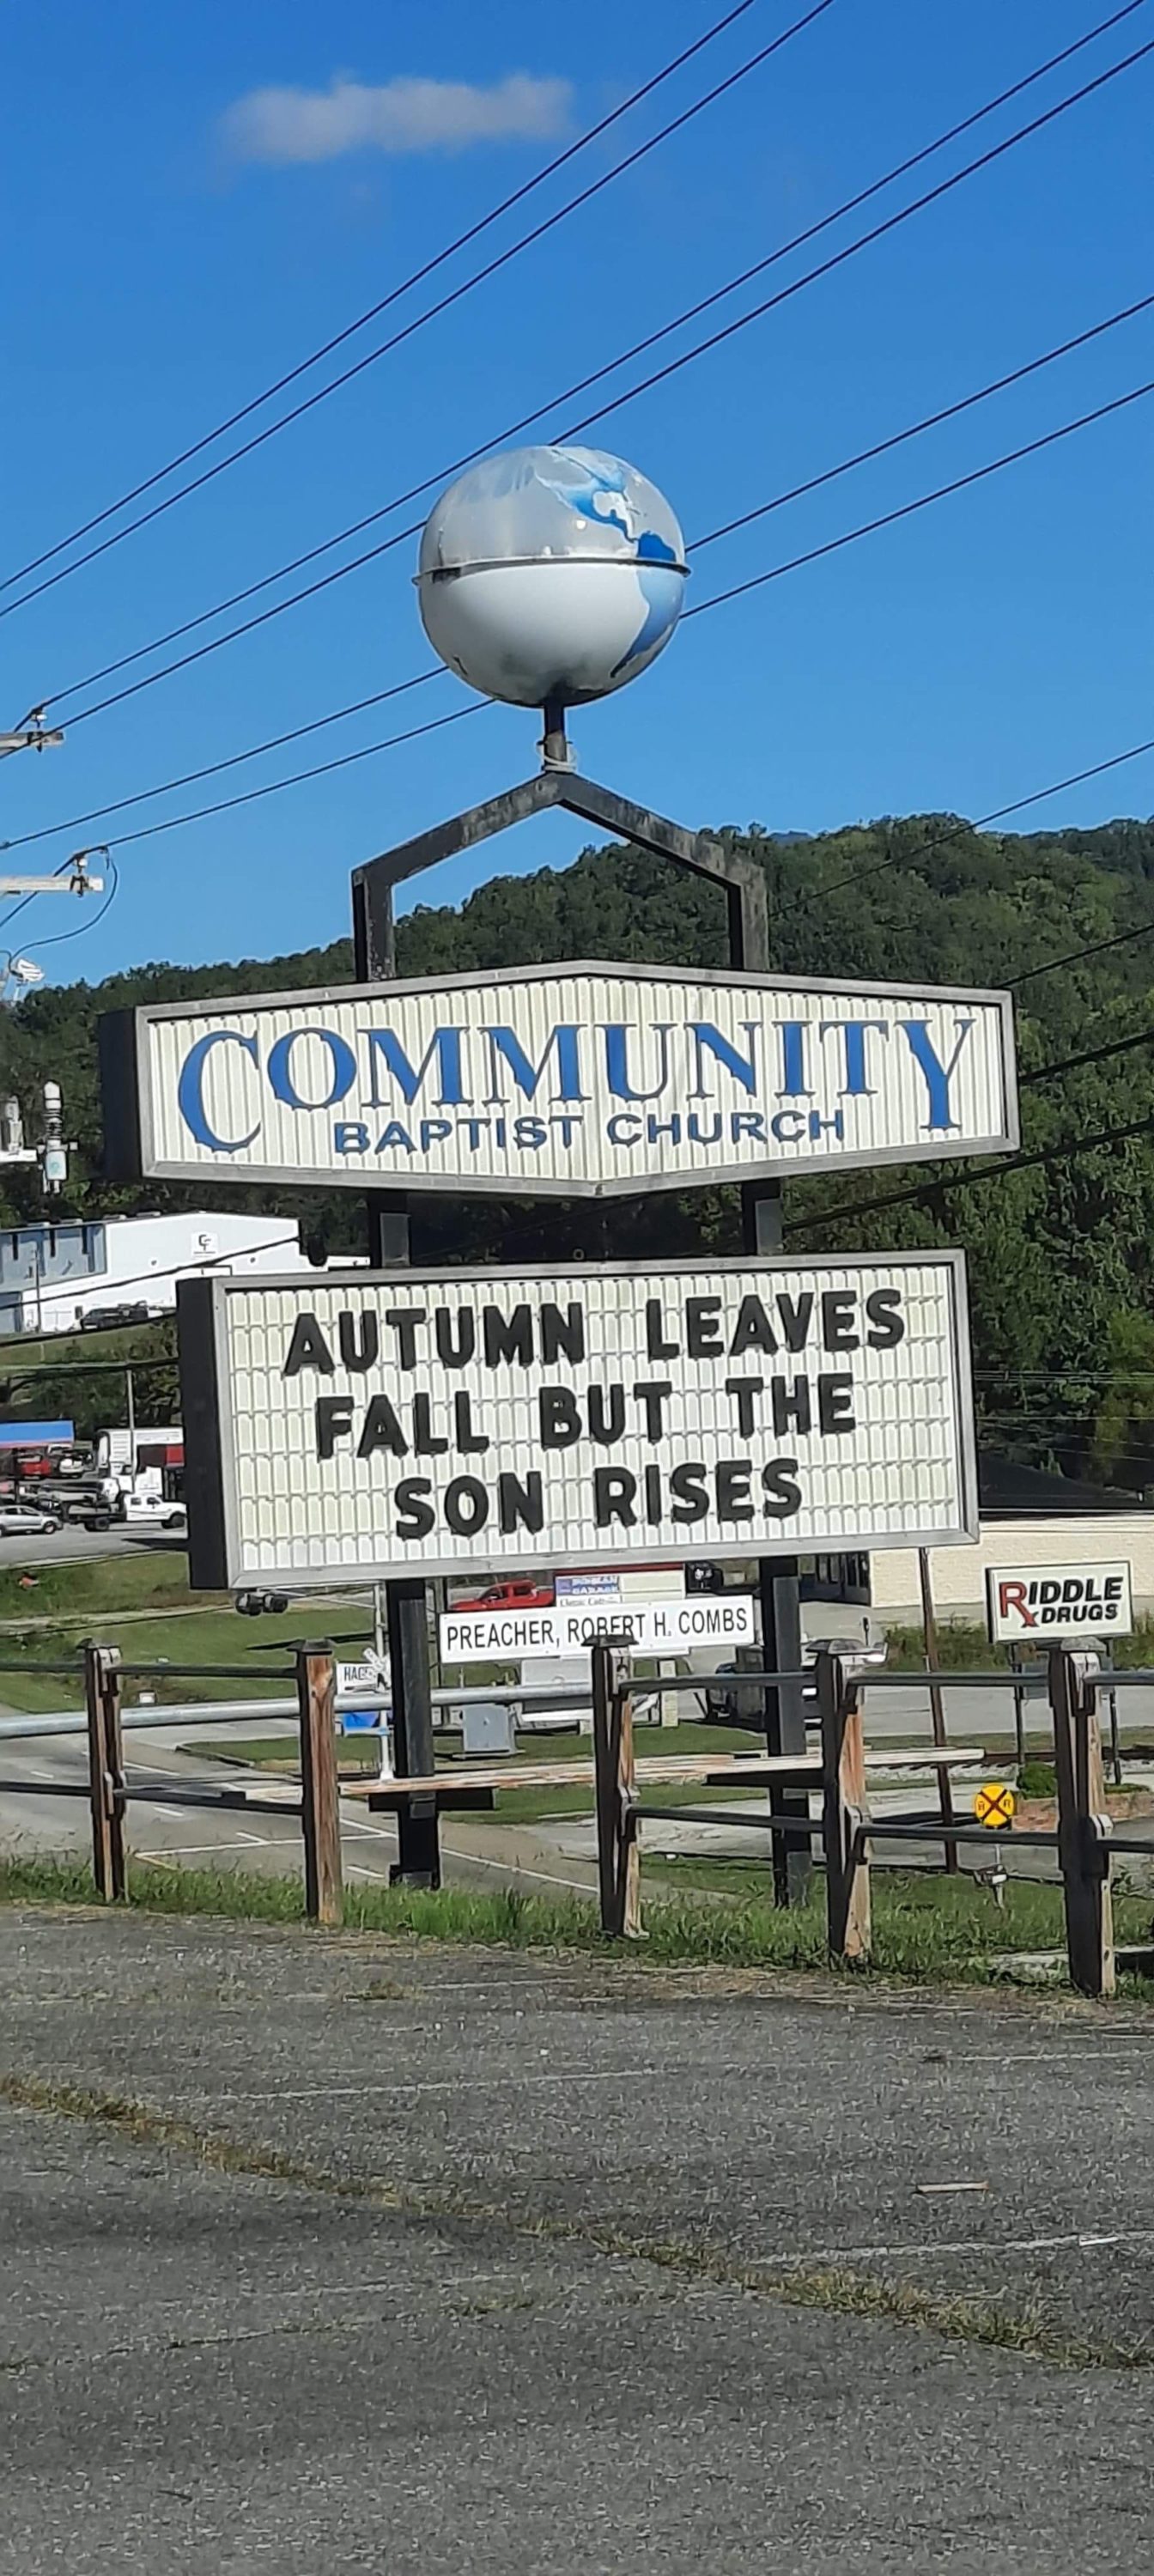 Autumn Leaves Fall Church Sign from Community Baptist Church in Oliver Springs, TN is this week's Church Sign Saturday.  (Autumn Leaves Fall But the Son Rises)